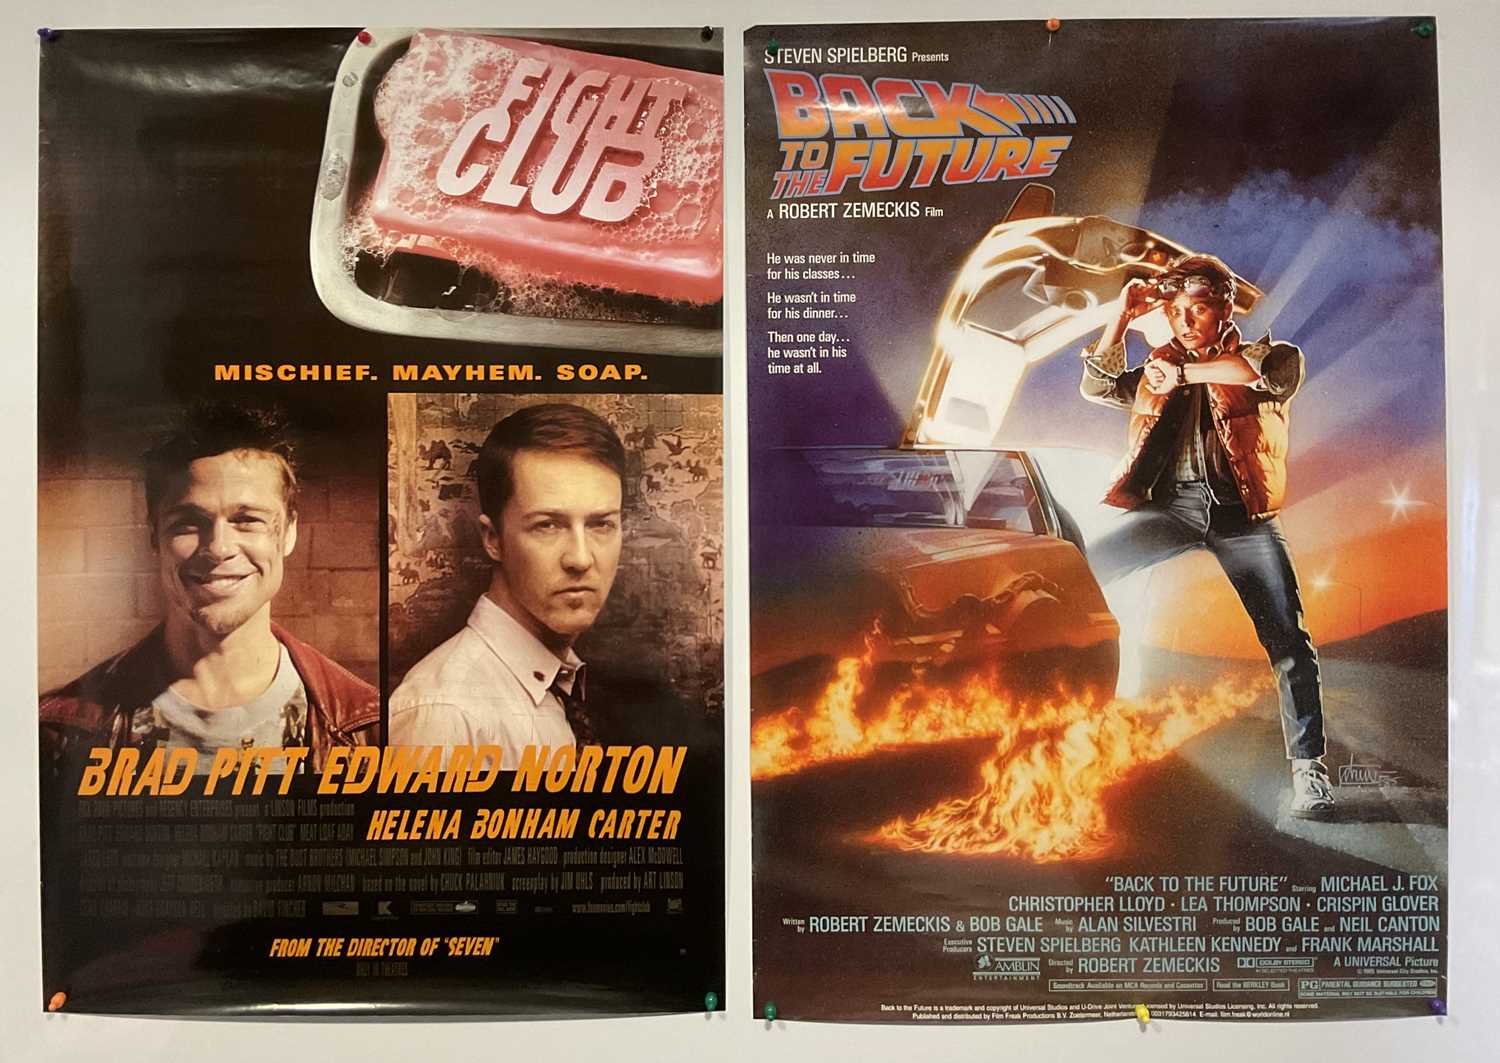 A pair of commercial one sheet film posters for FIGHT CLUB (1999) - David Fincher and BACK TO THE